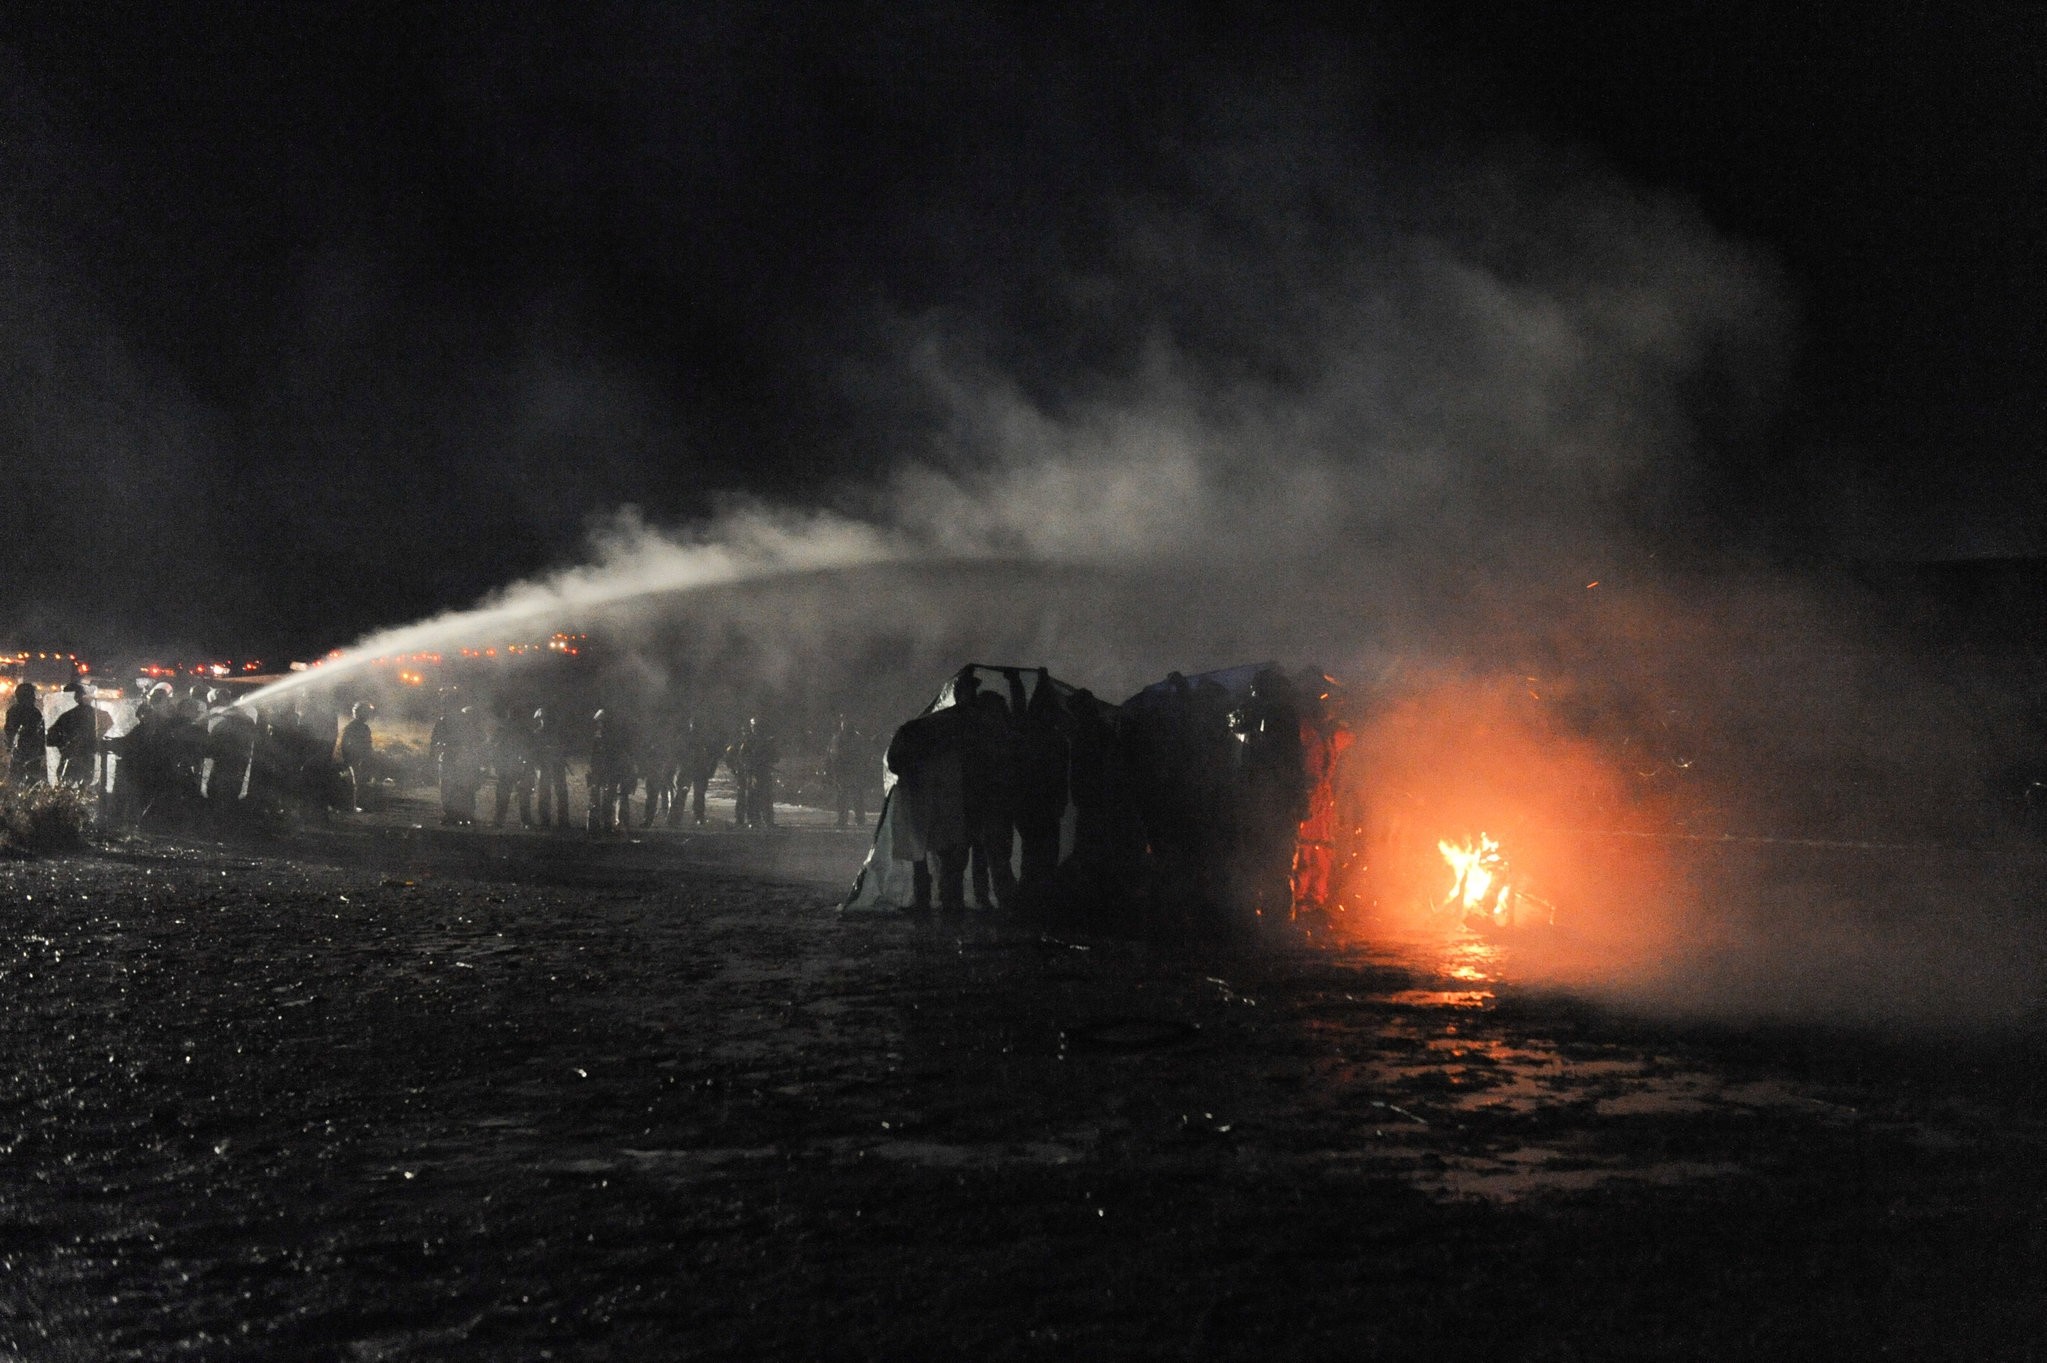 Police use a water cannon to put out a fire started by protesters during a protest against plans to pass the Dakota Access pipeline near the Standing Rock Indian Reservation. (REUTERS Photo)